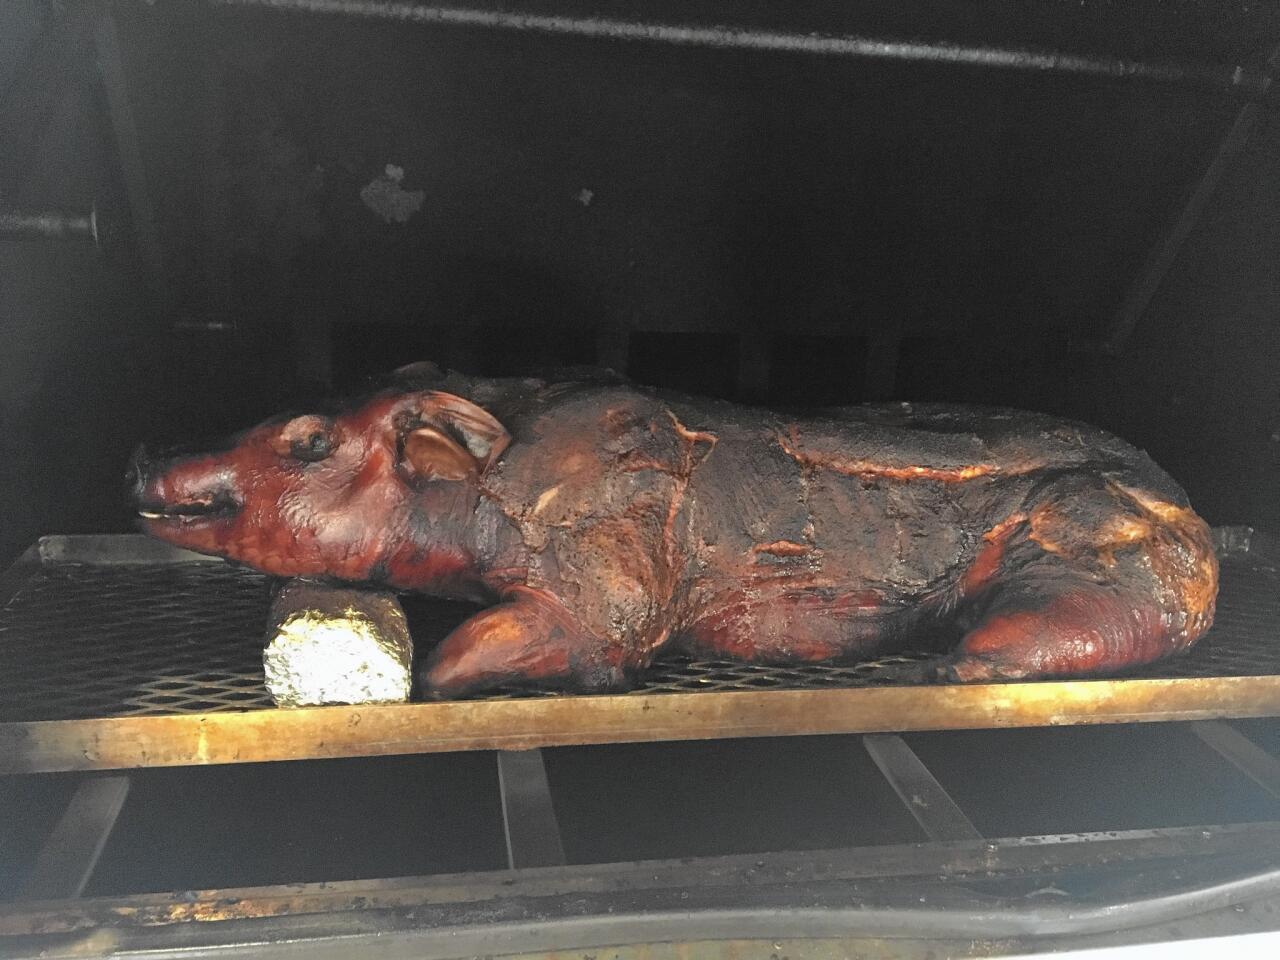 Should you wish to behold the glory that is an entire pig being smoked at Pappy's Smokehouse, Mike "Pappy" Emerson will show you how it's done.